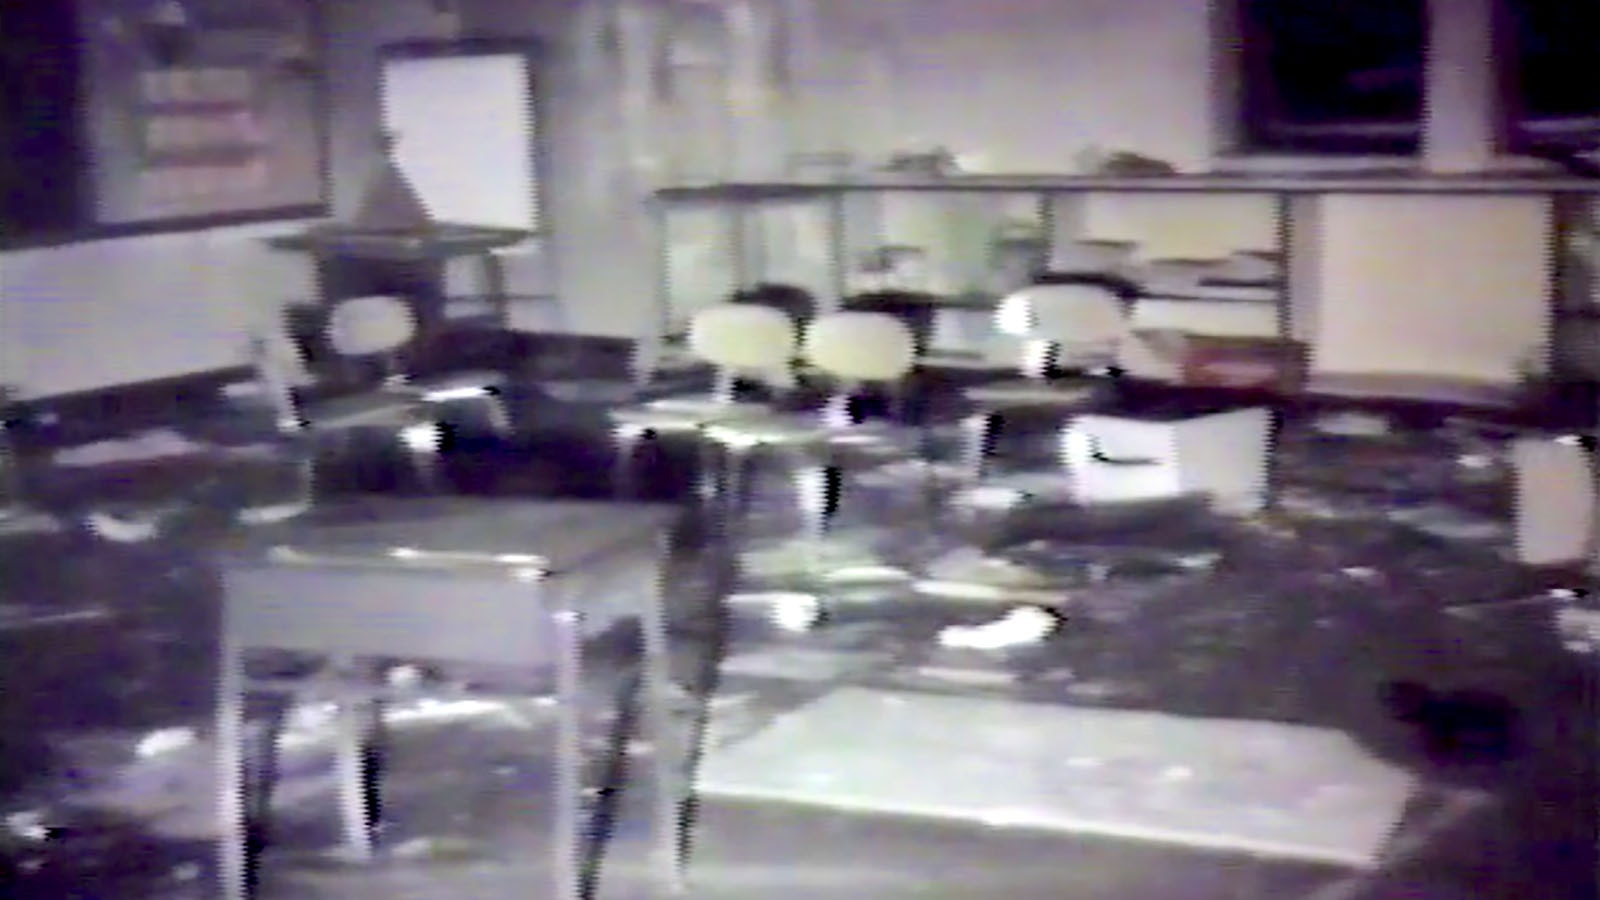 Cokeville bombing classroom scene still from video. Some say the impression on the far way resembles an angel.